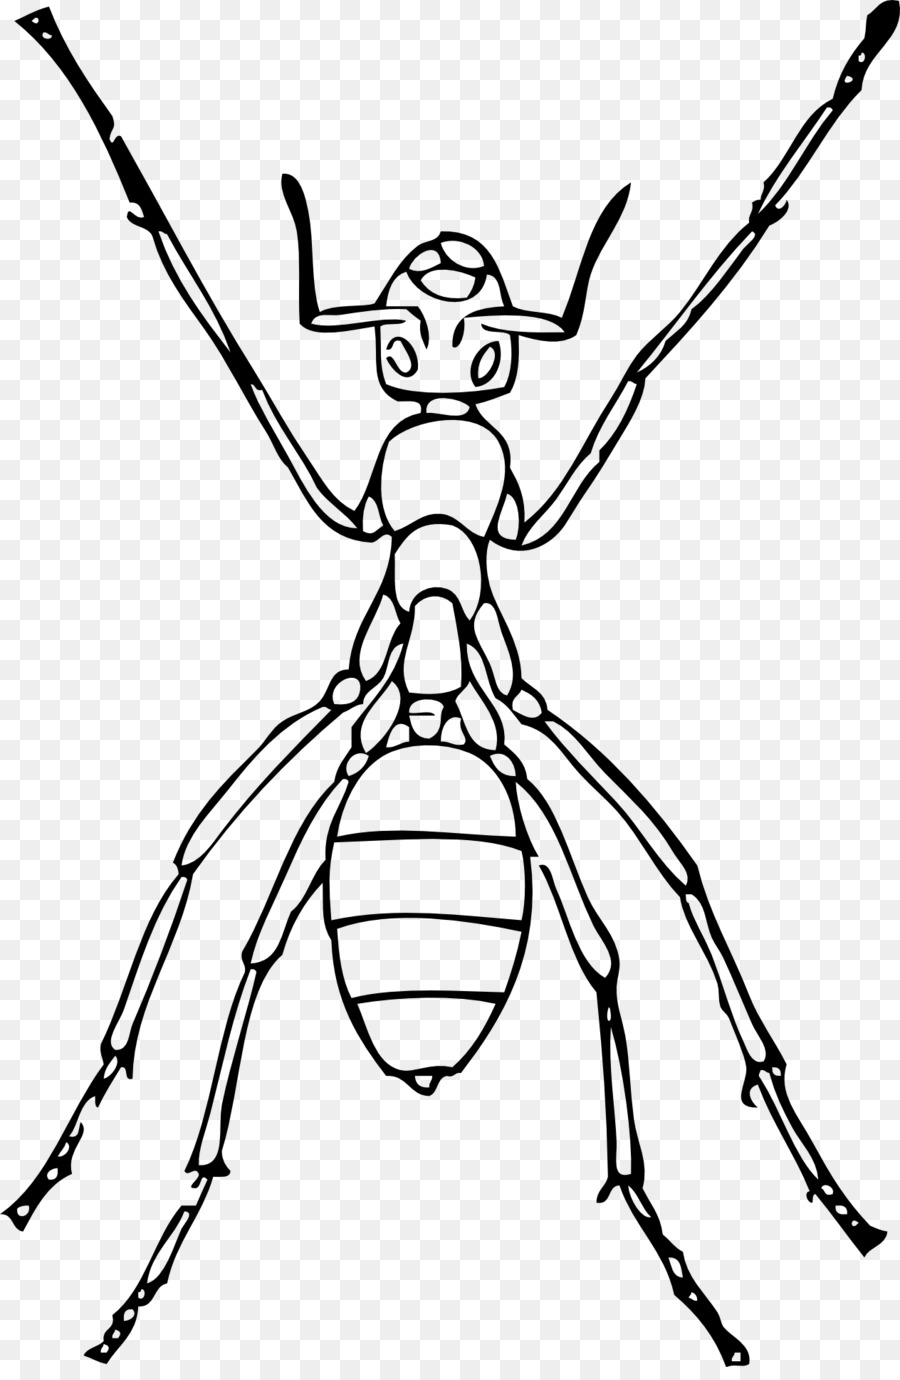 Insect clip art png. Ant clipart line drawing